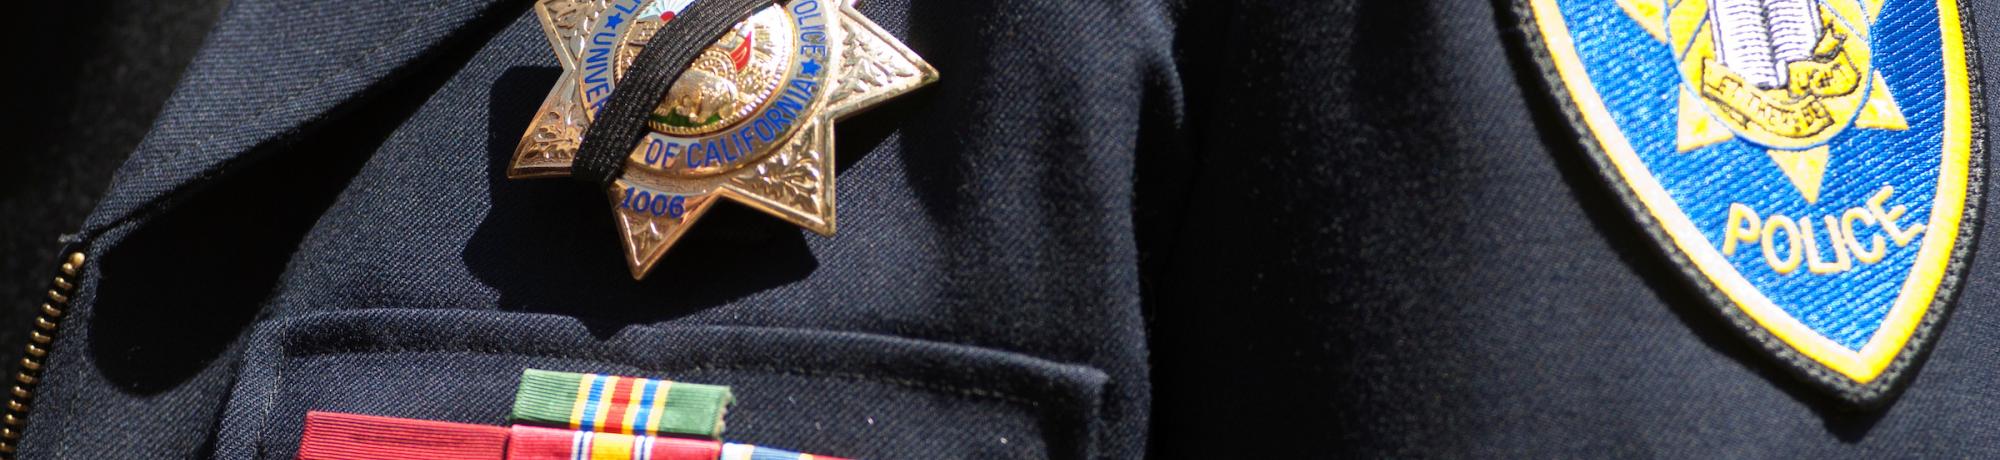 Close up of police officer badge